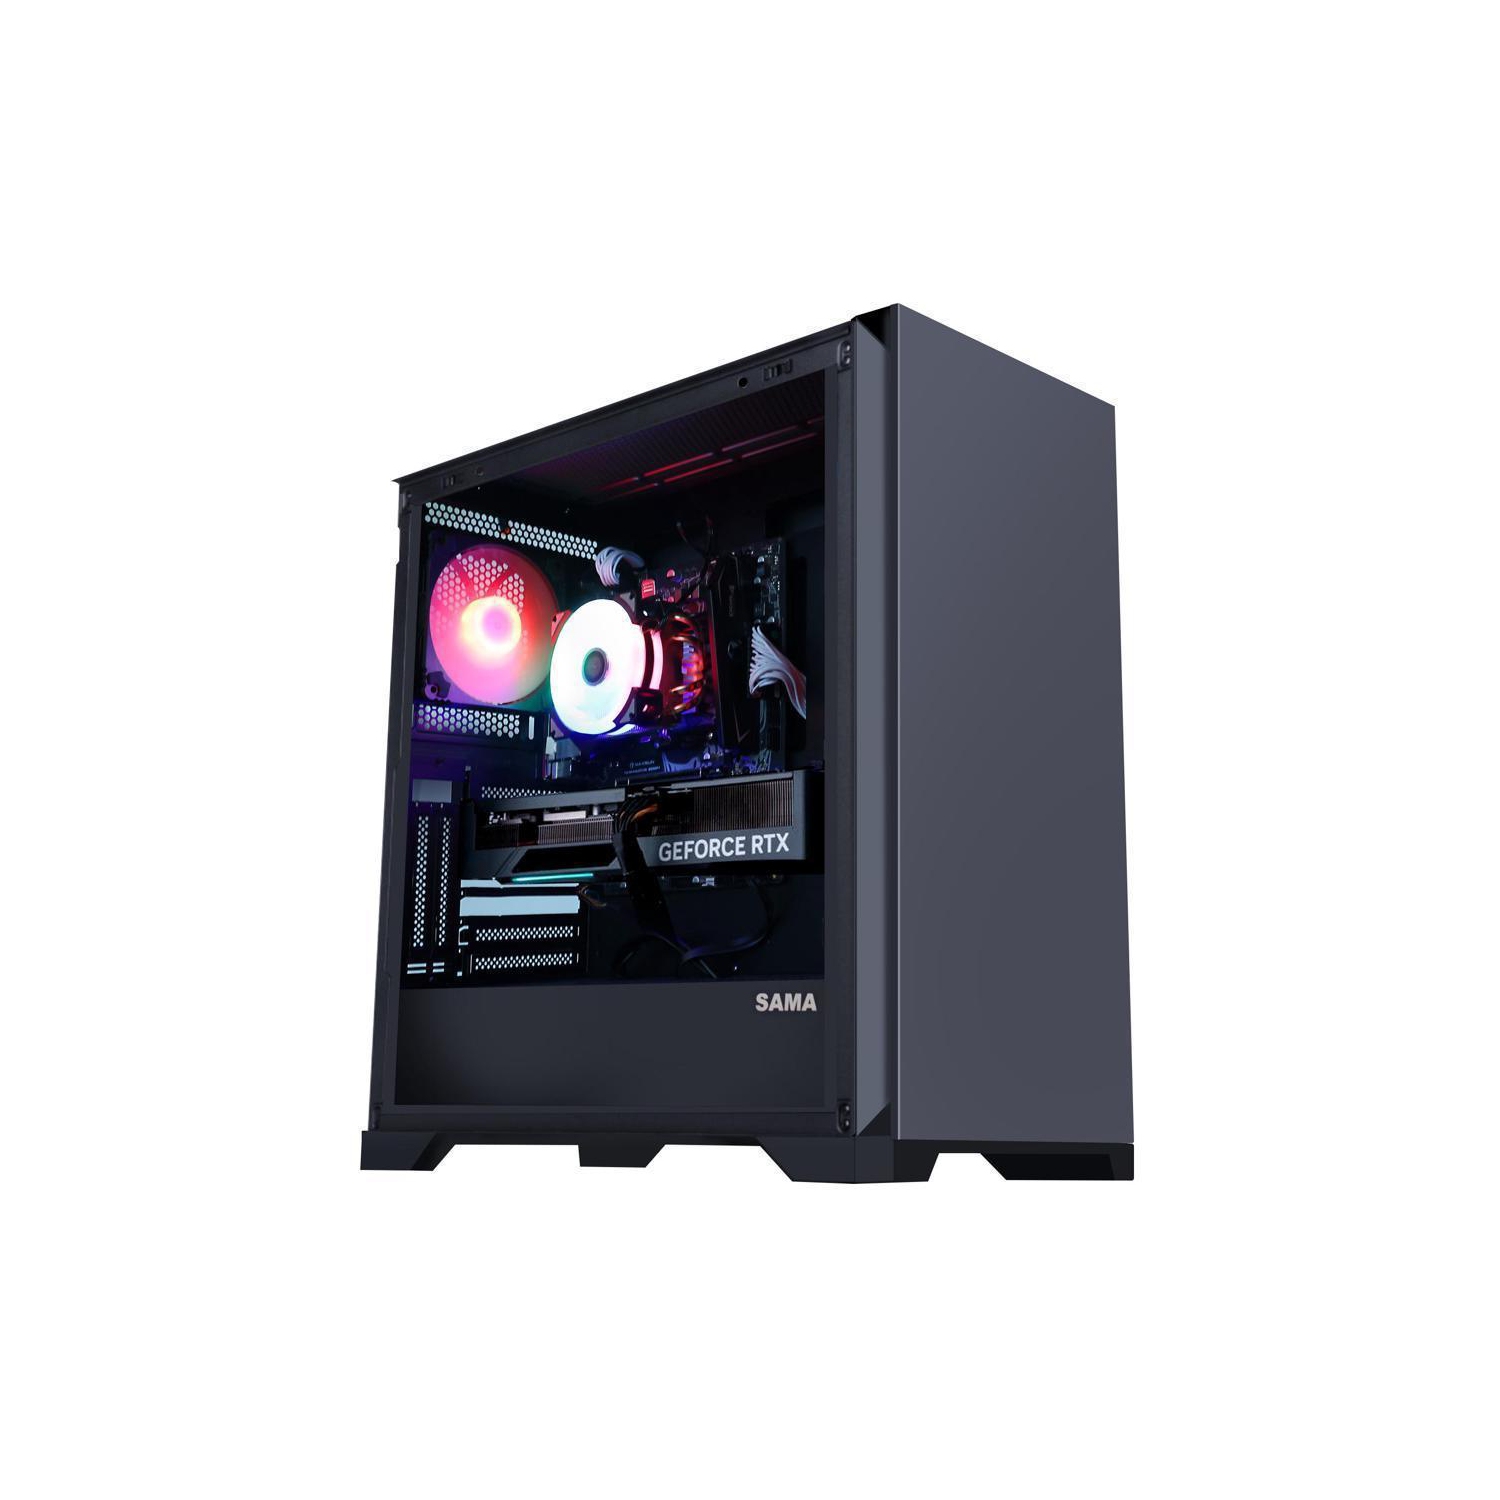 Hoengager Ares Gaming - Intel Core i5-12600K 10-Core 3.7GHz-NVIDIA GeForce RTX 3060 - 16GB DDR4 3200MHz - 500GB M.2 + 1TB 2.5'' SATA SSD- WIFI -RGB Fans - Windows 11 Pro Computer